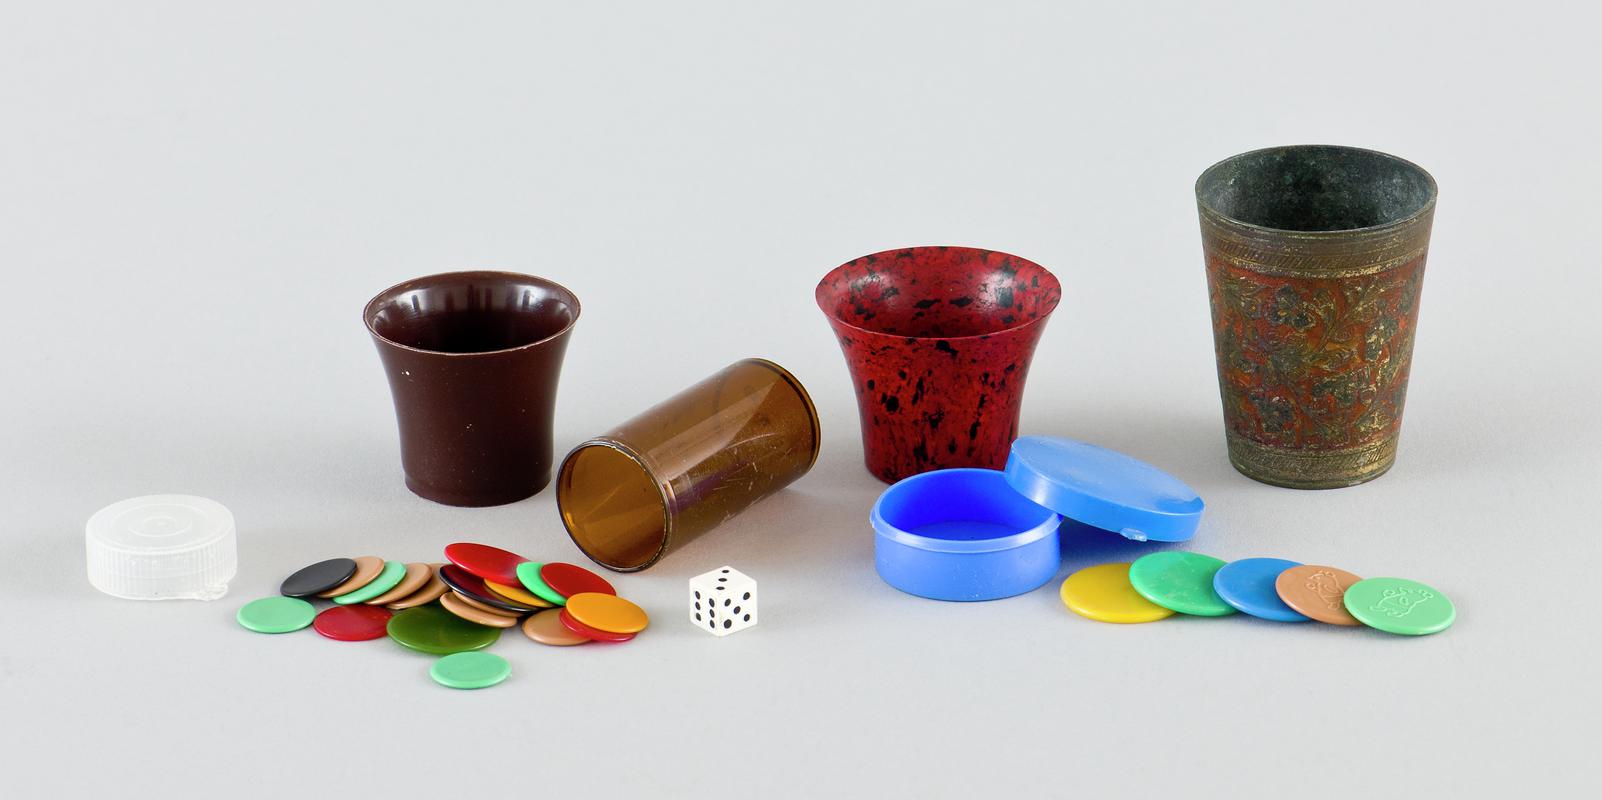 Tiddlywinks game and cups.  Twenty-one counters stored in brown plastic medication case (three larger than rest) along with a small plastic dice. Five counters (two a smaller design with bear motif) stored in blue plastic case with bear motif on interior base.   Large metal cup with raised floral design around body on red background. Medium sized red and black marble effect plastic cup. Smallest cup is plain brown plastic.